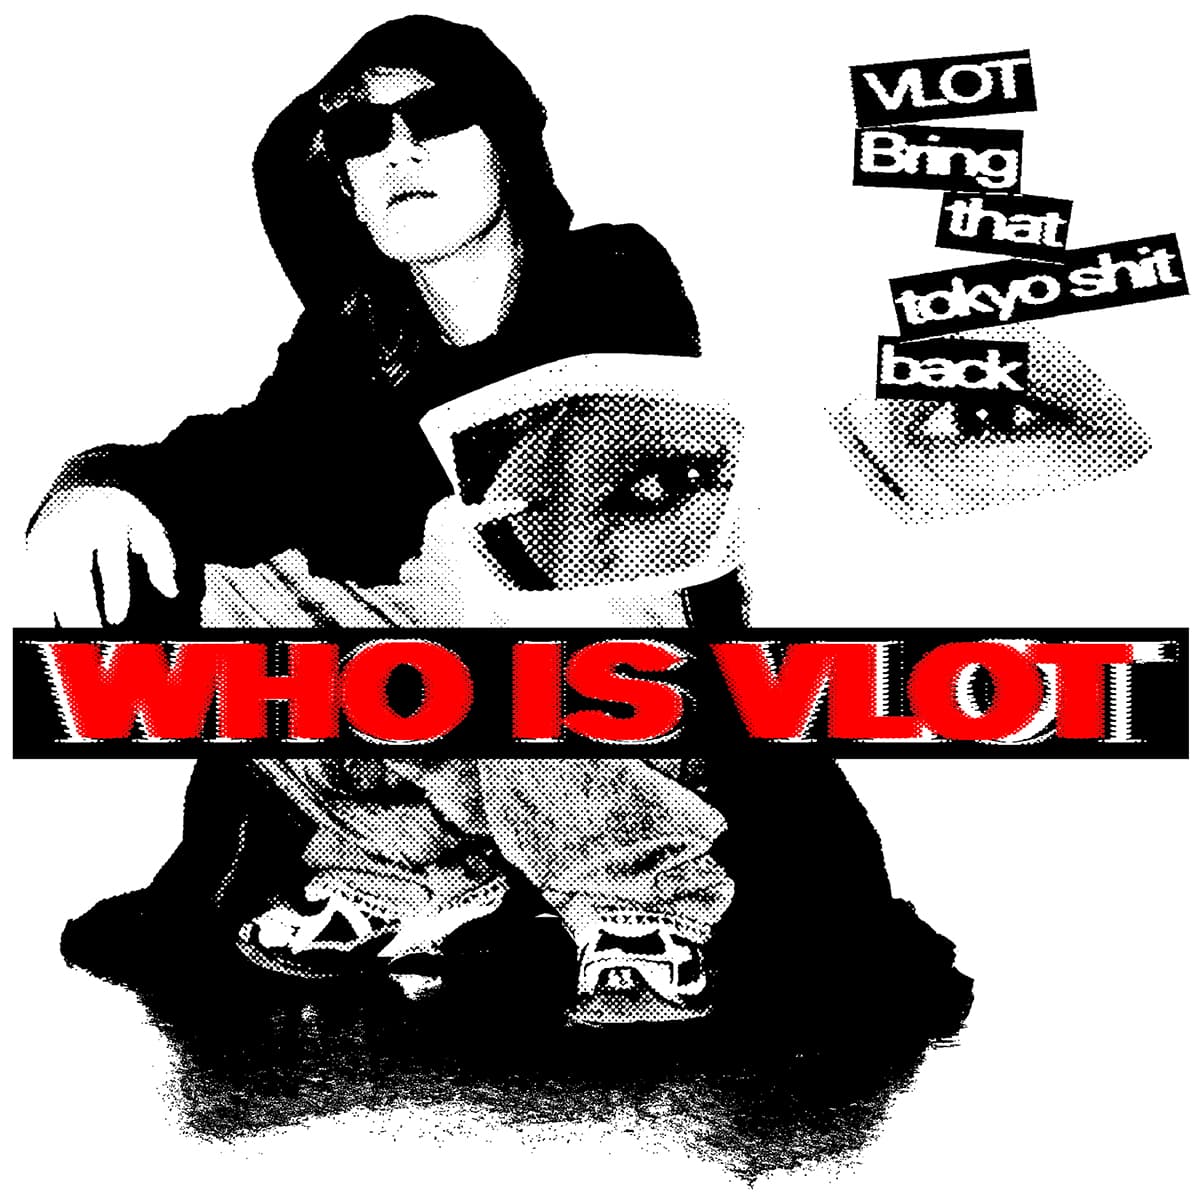 WHO IS VLOT